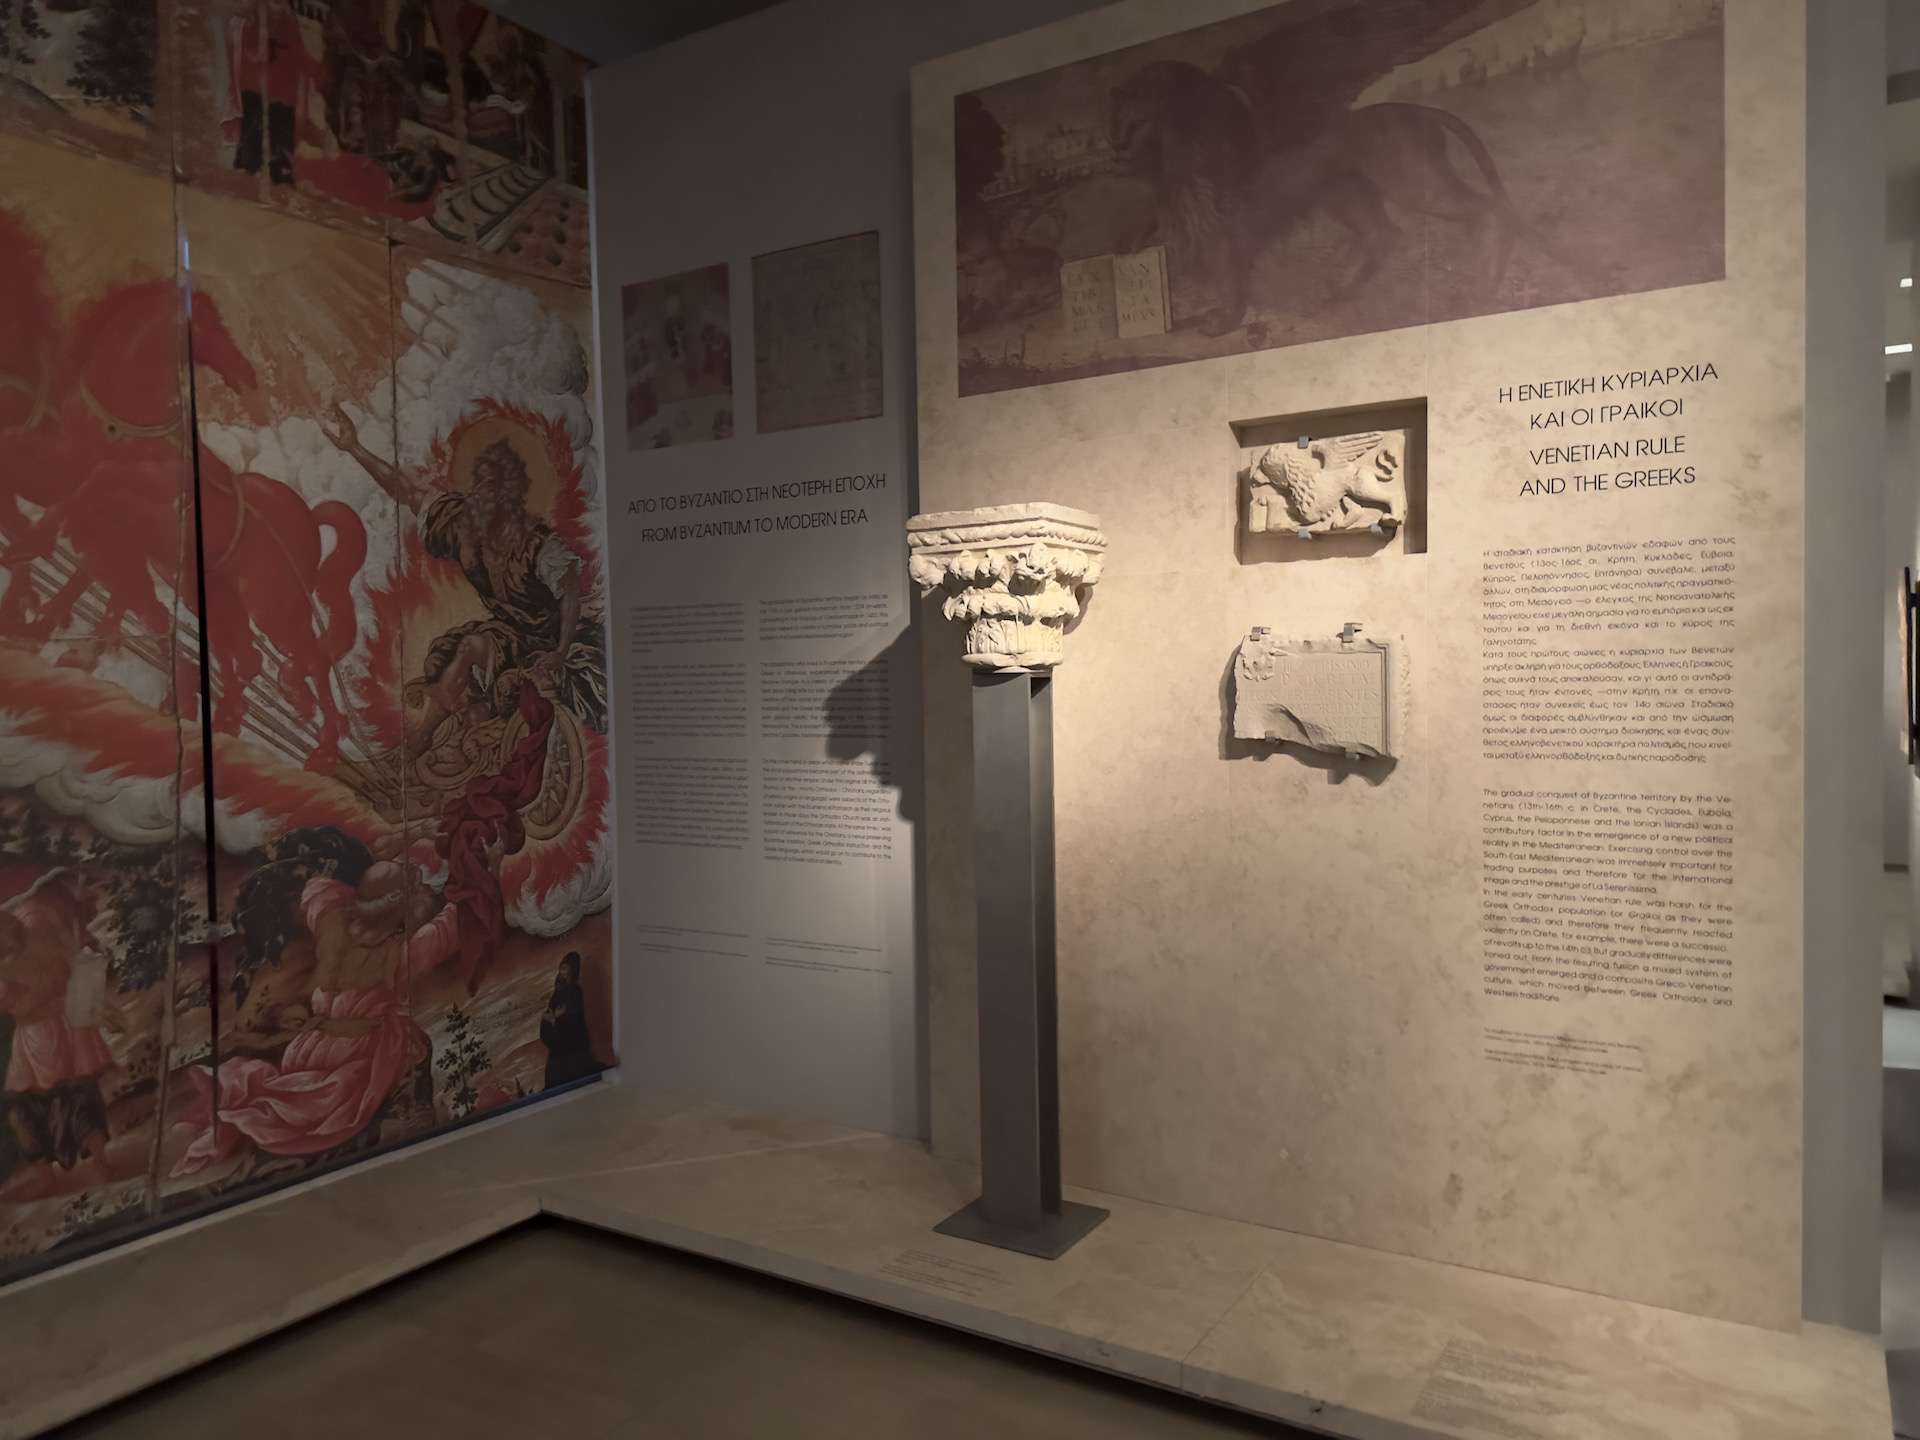 Venetian rule and the Greeks at the Byzantine Museum in Athens, Greece